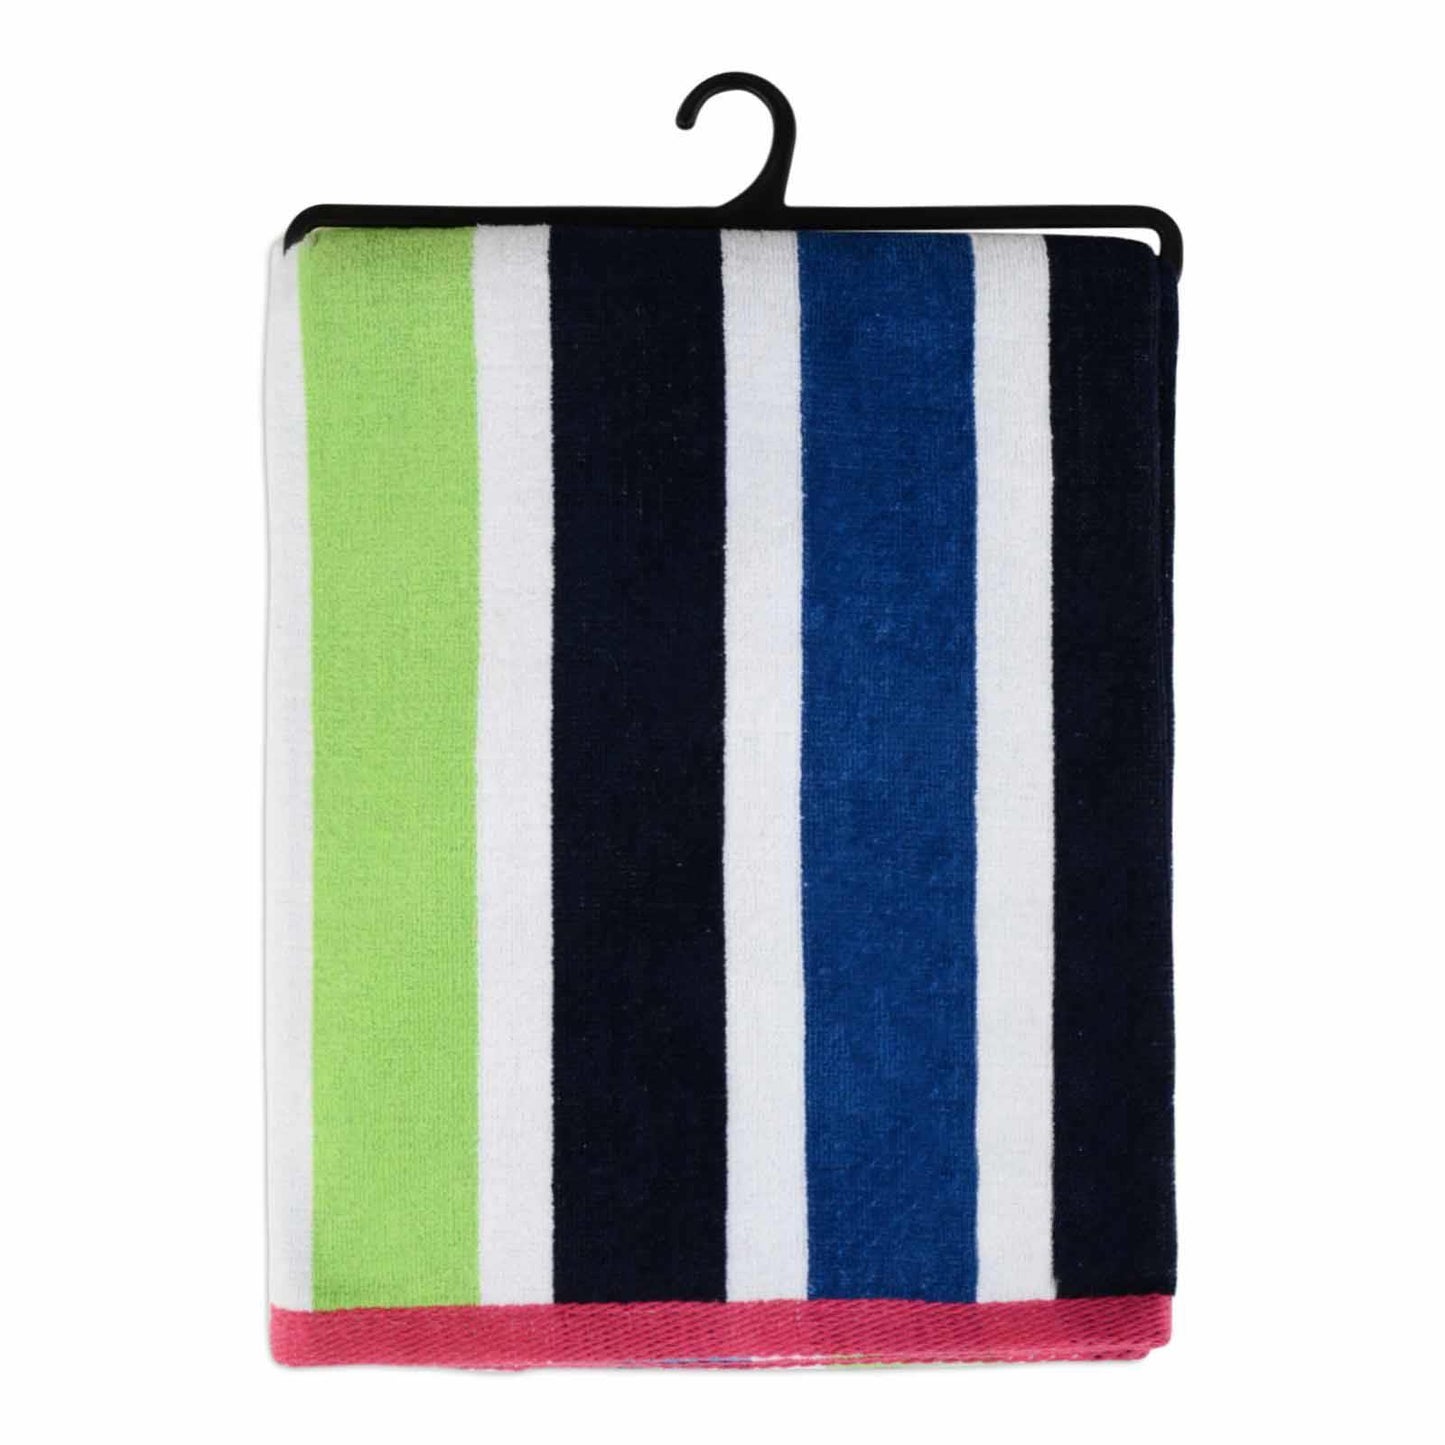 Large Velour Striped Beach Towel (Sanguine) by Geezy - UKBuyZone